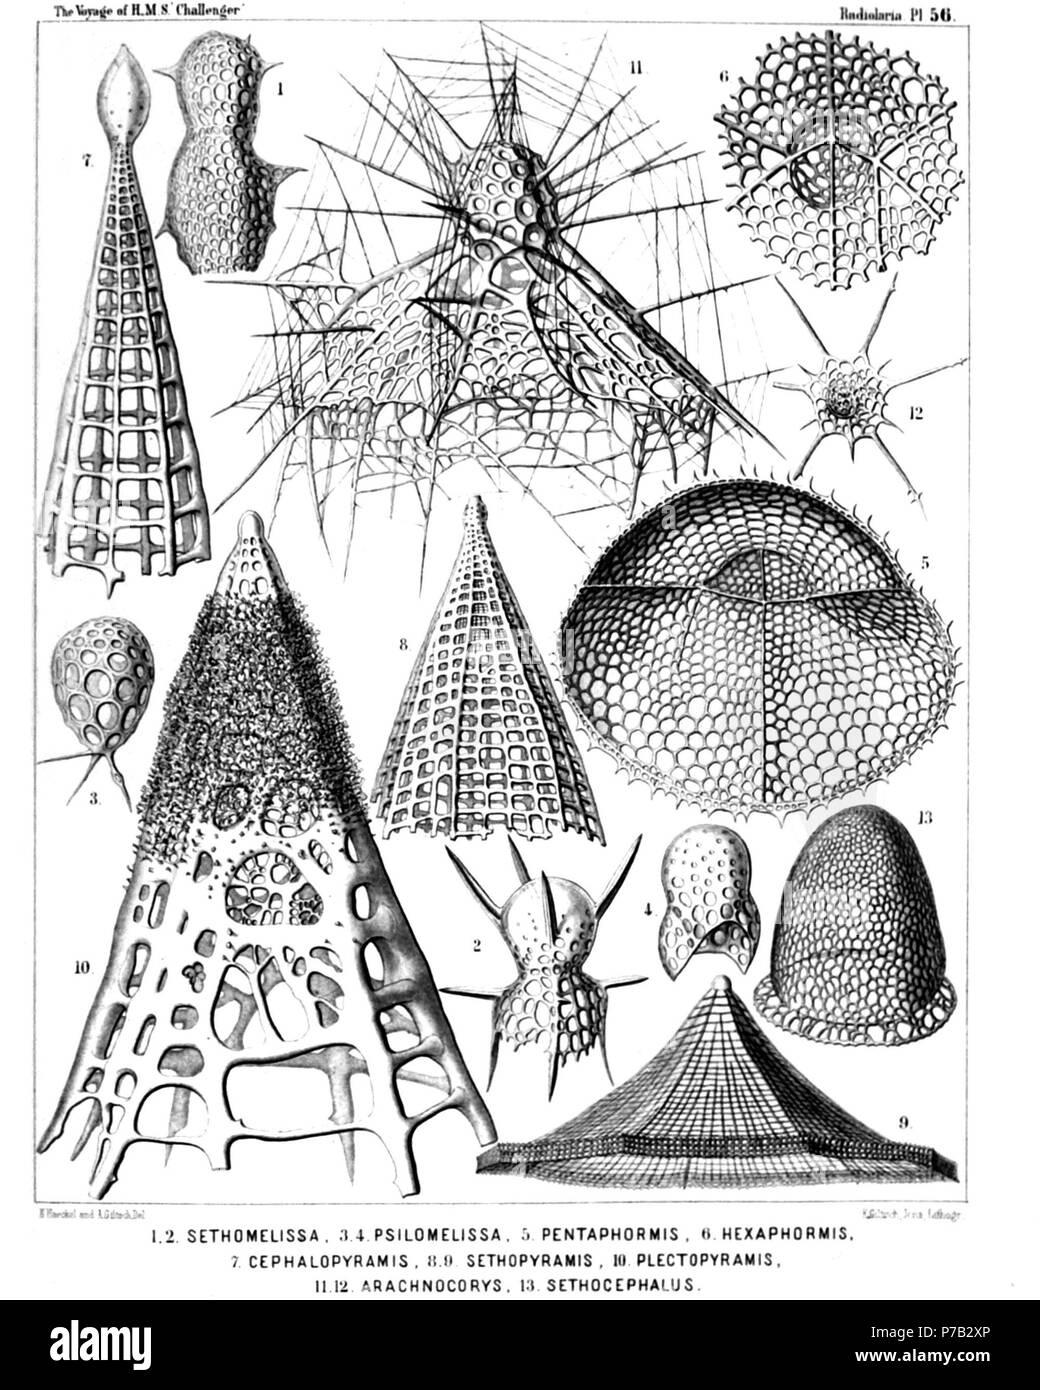 English: Illustration from Report on the Radiolaria collected by H.M.S. Challenger during the years 1873-1876. Part III. Original description follows:  Plate 56. Tripocyrtida, Anthocyrtida et Sethocyrtida.  Diam.  Fig. 1. Lithomelissa bütschlii, n. sp. (vel Sethomelissa bütschlii), × 400  Fig. 2. Lithomelissa decacantha, n. sp. (vel Sethomelissa decacantha), × 400  Fig. 3. Psilomelissa calvata, n. sp., × 400  The cephalis alone, with the three collar beams.  Fig. 4. Lychnodictyum scaphopodium, n. sp., × 400  Fig. 5. Sethophormis pentalactis, n. sp. (vel Pentaphormis pentalactis), × 400  Obliqu Stock Photo